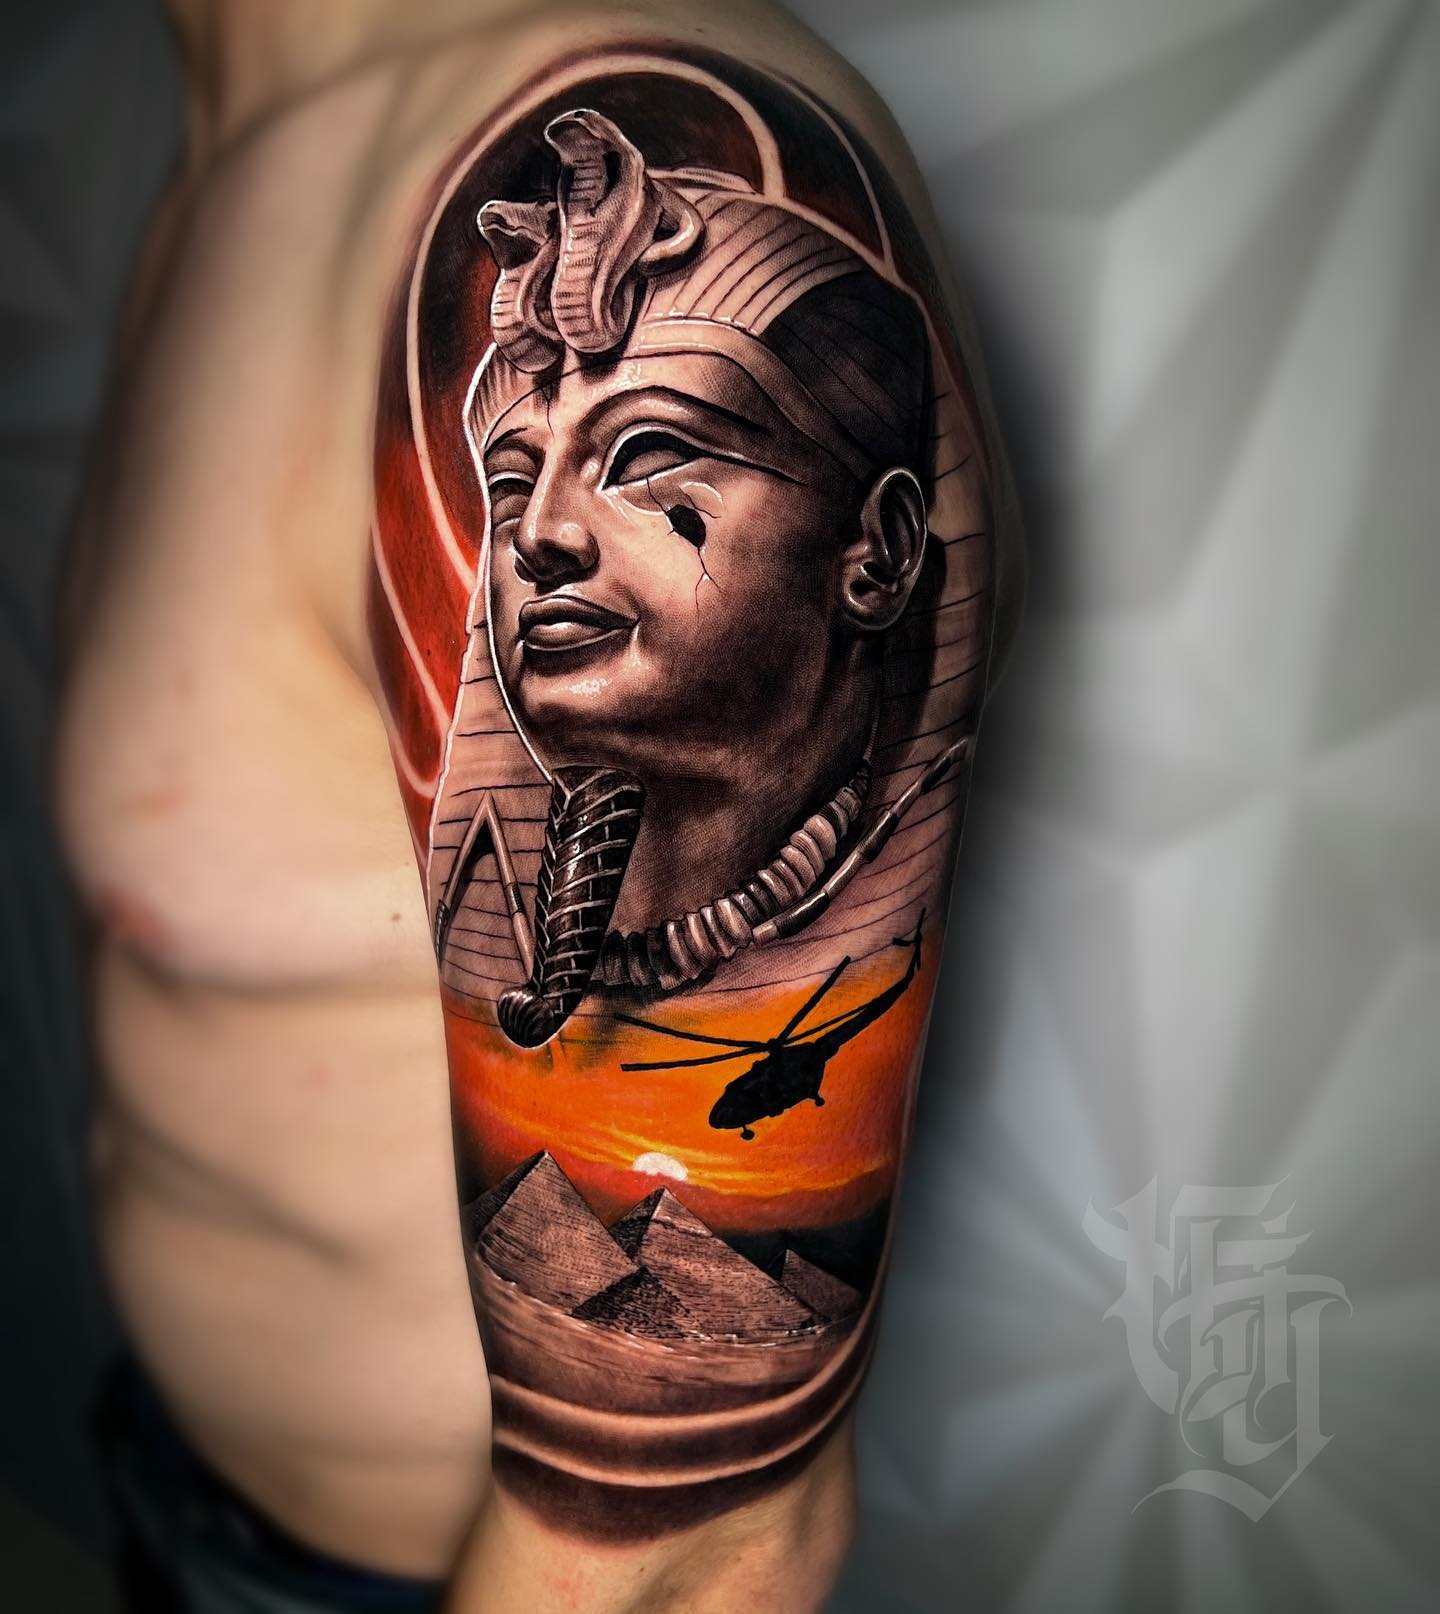 King of kings | Tattoo contest | 99designs